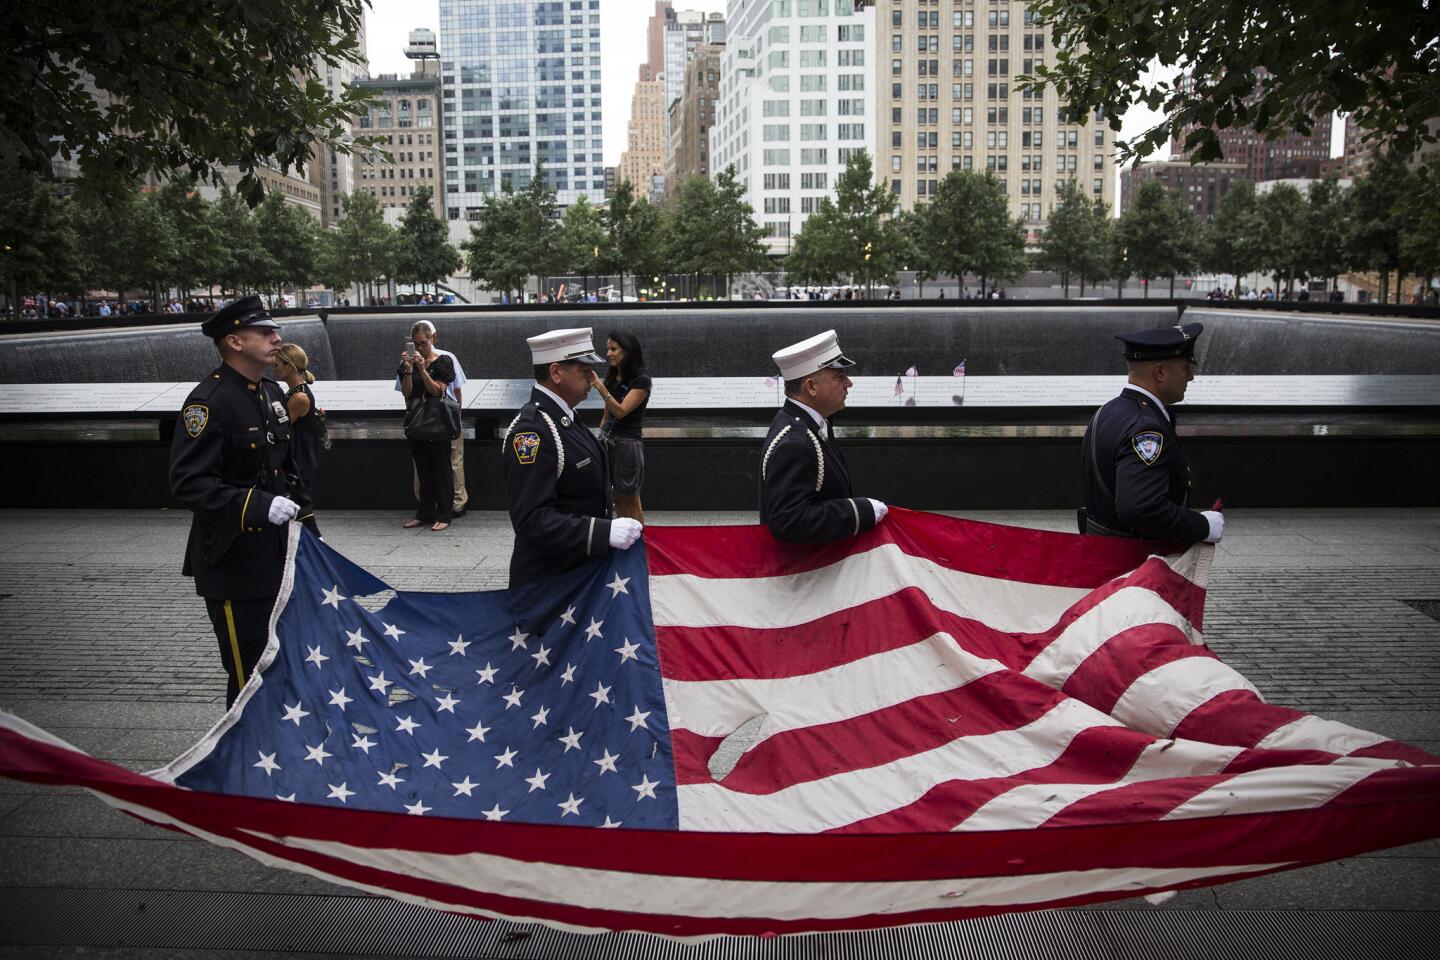 Members of the New York Police Department, Fire Department of New York and Port Authority Police Department carry an American flag damaged in the 9/11 attack at the beginning of commemoration ceremonies at the site of the World Trade Center.